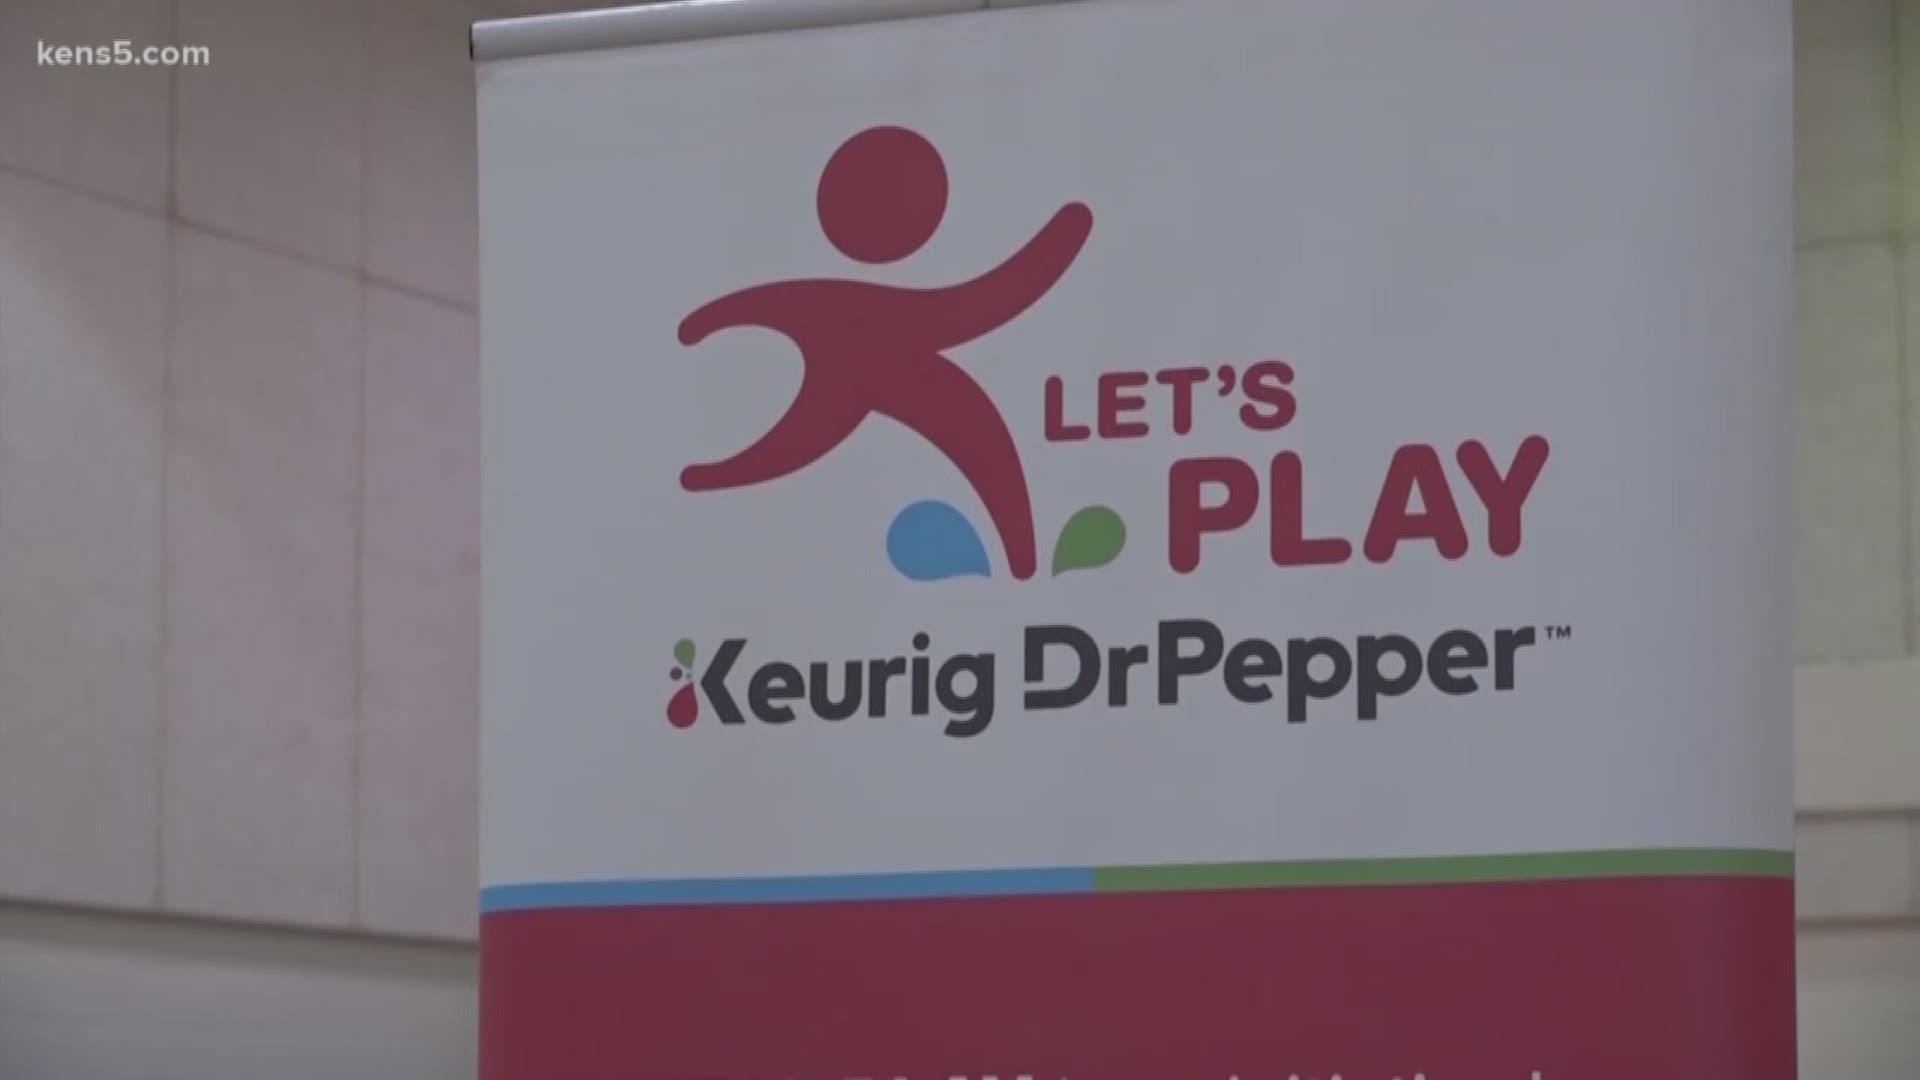 As part of the Boys & Girls Club "Let's Play" initiative, clubs across San Antonio hosted a "Day of Play" to help encourage kids to play outside more often.